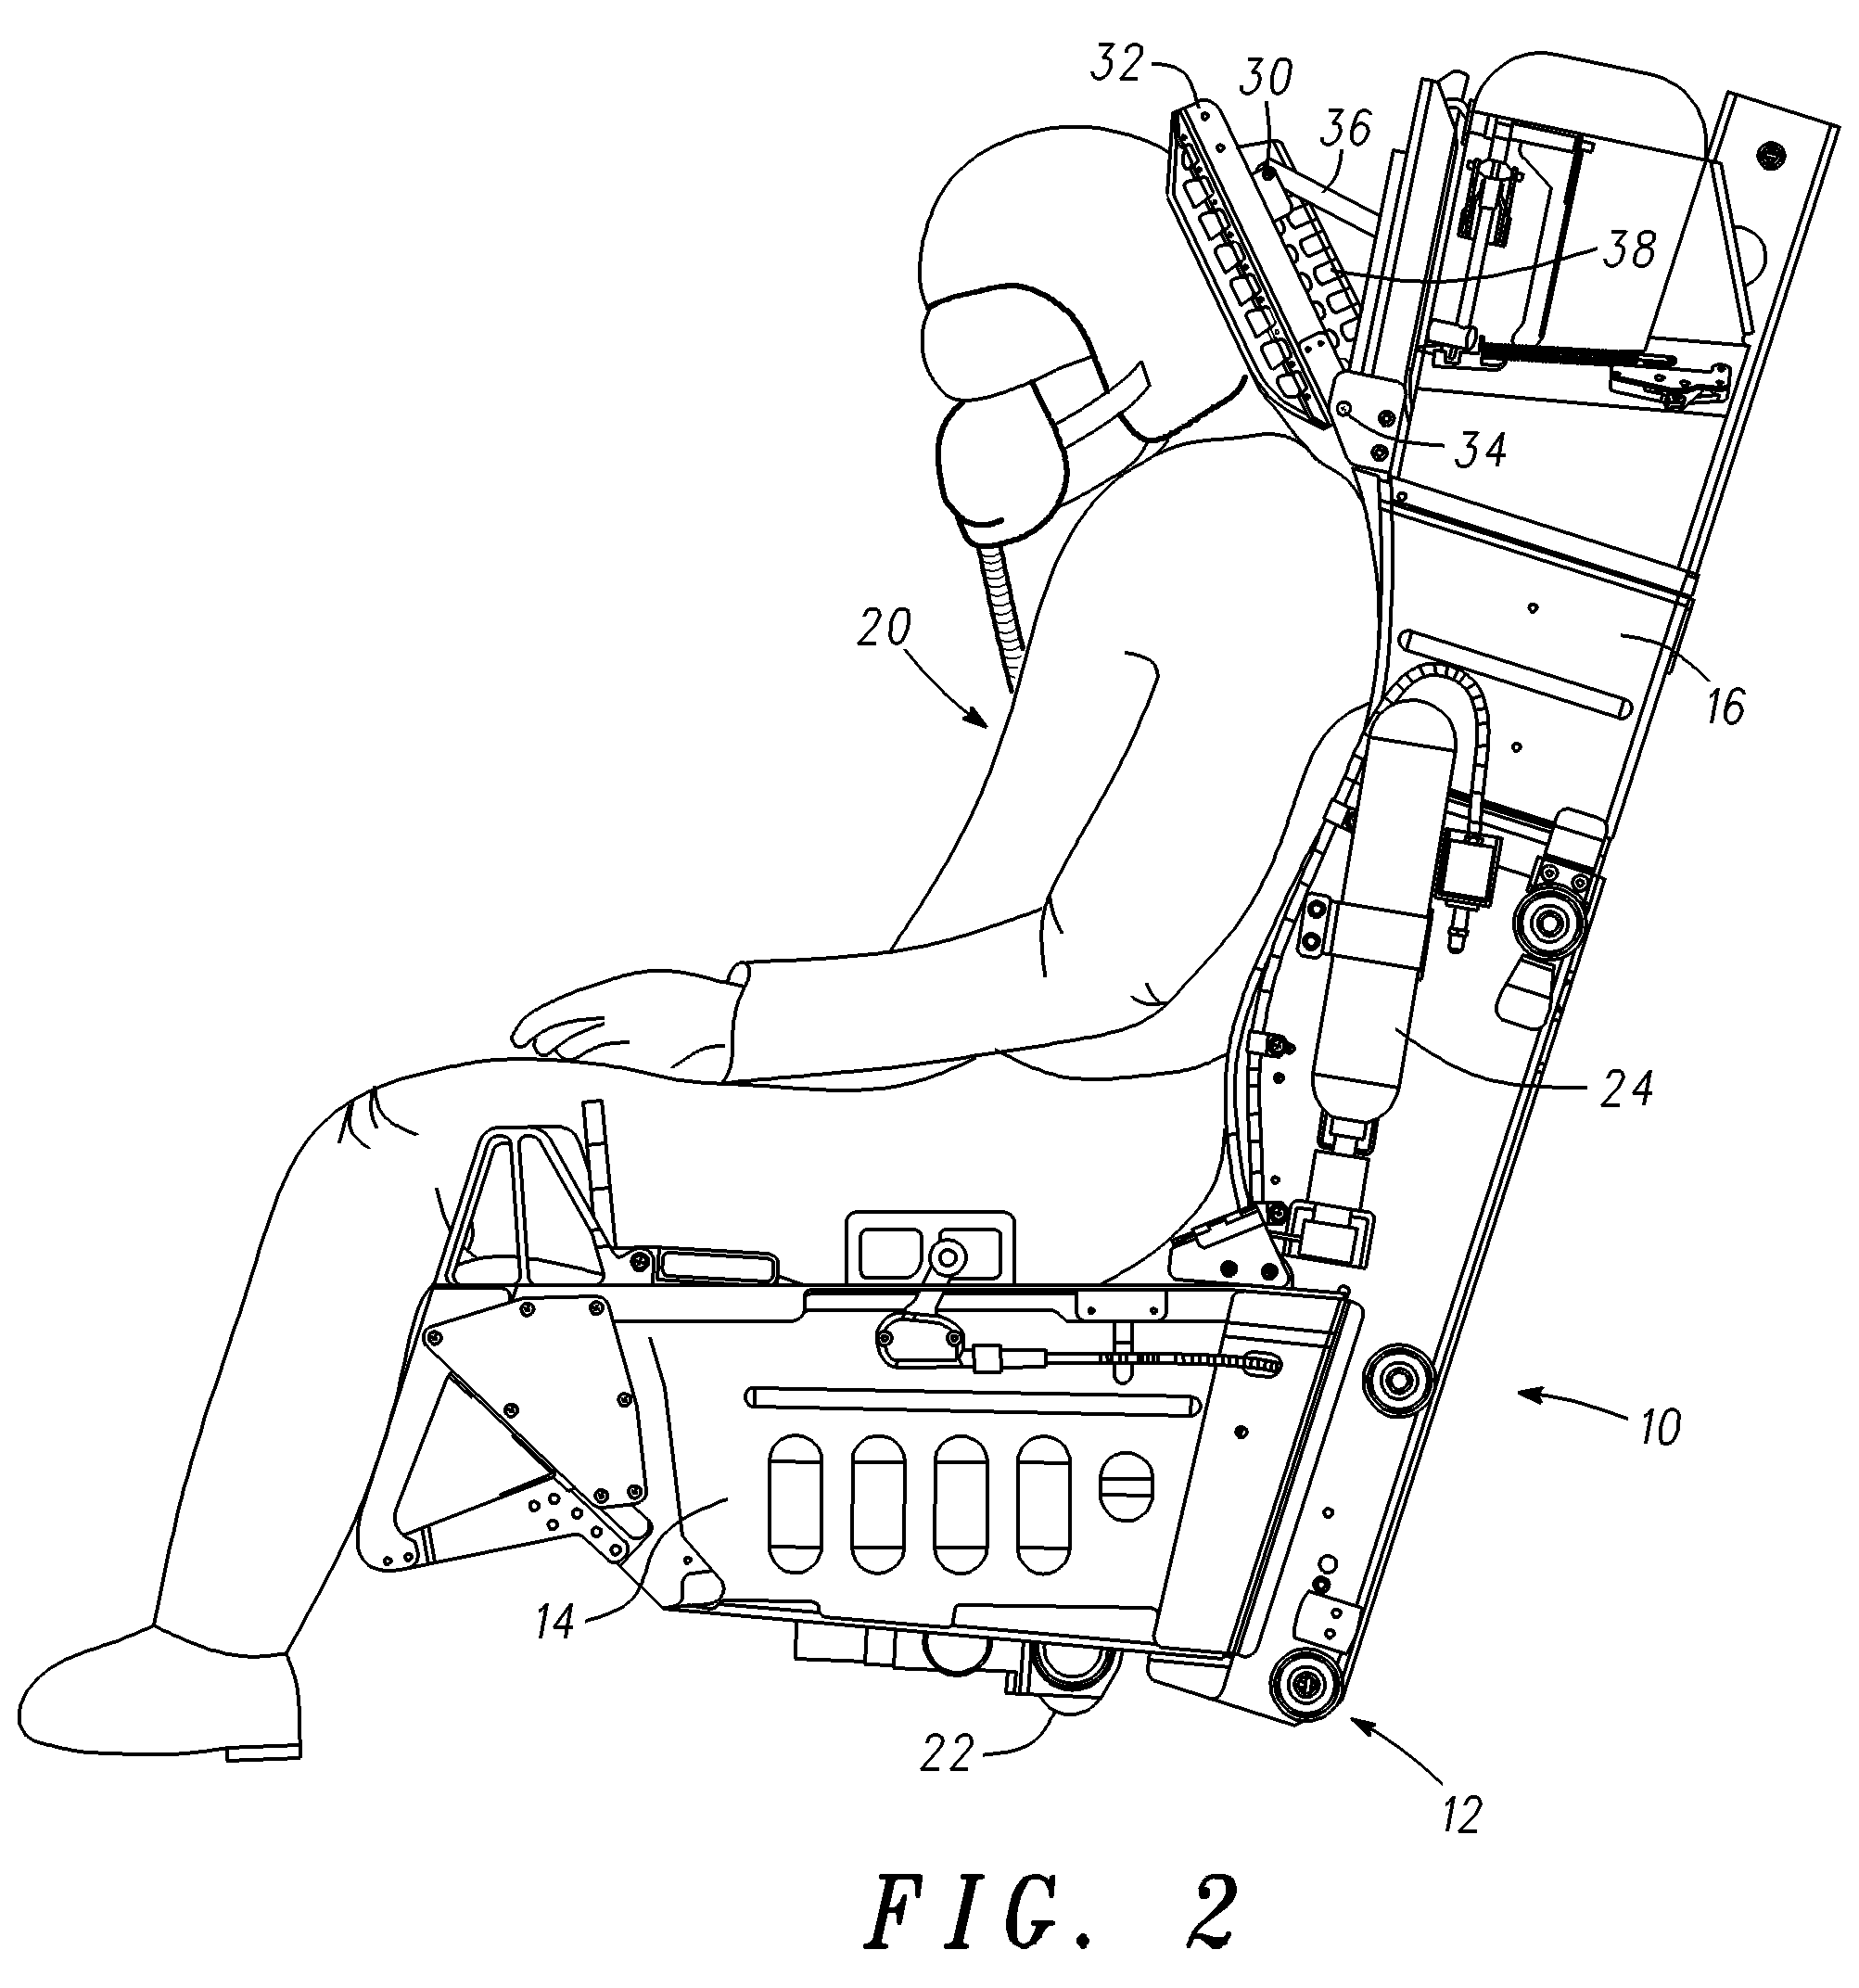 Aircraft ejection seat with movable headrest